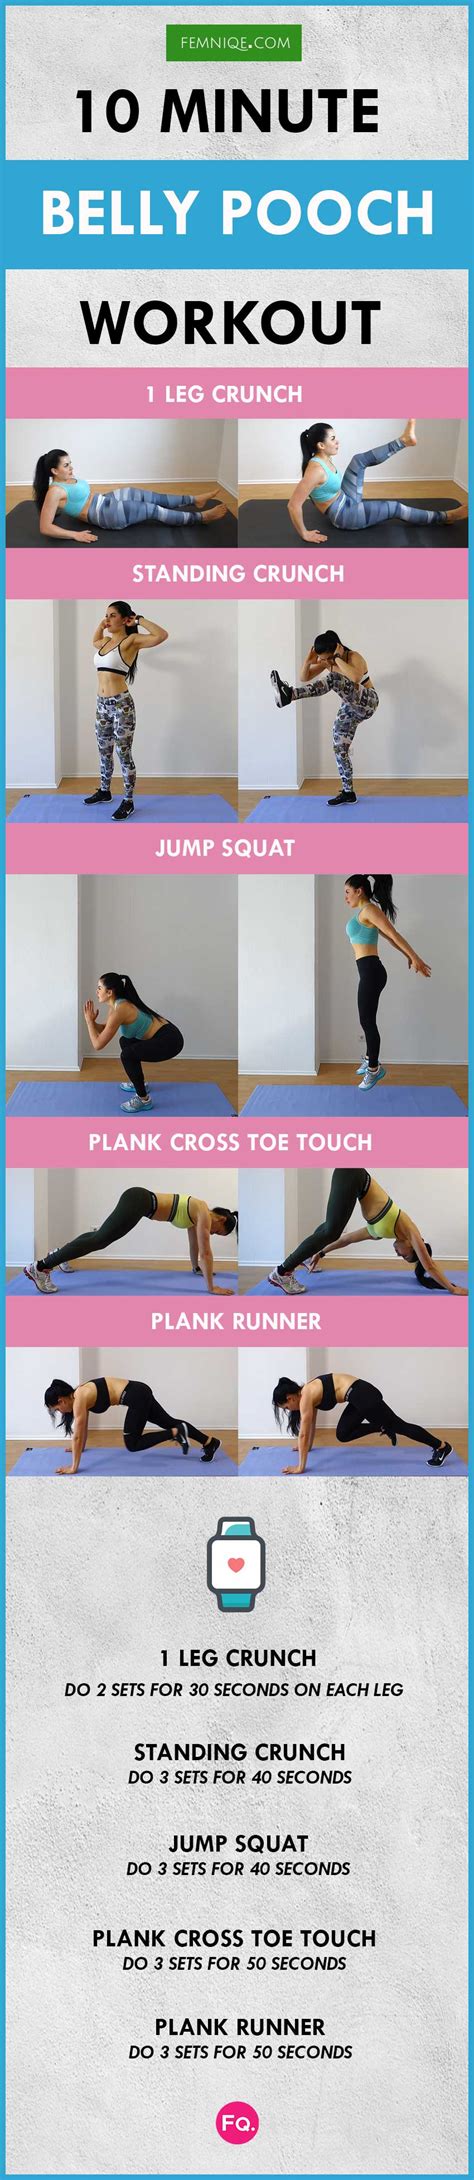 Pooch Belly Exercises